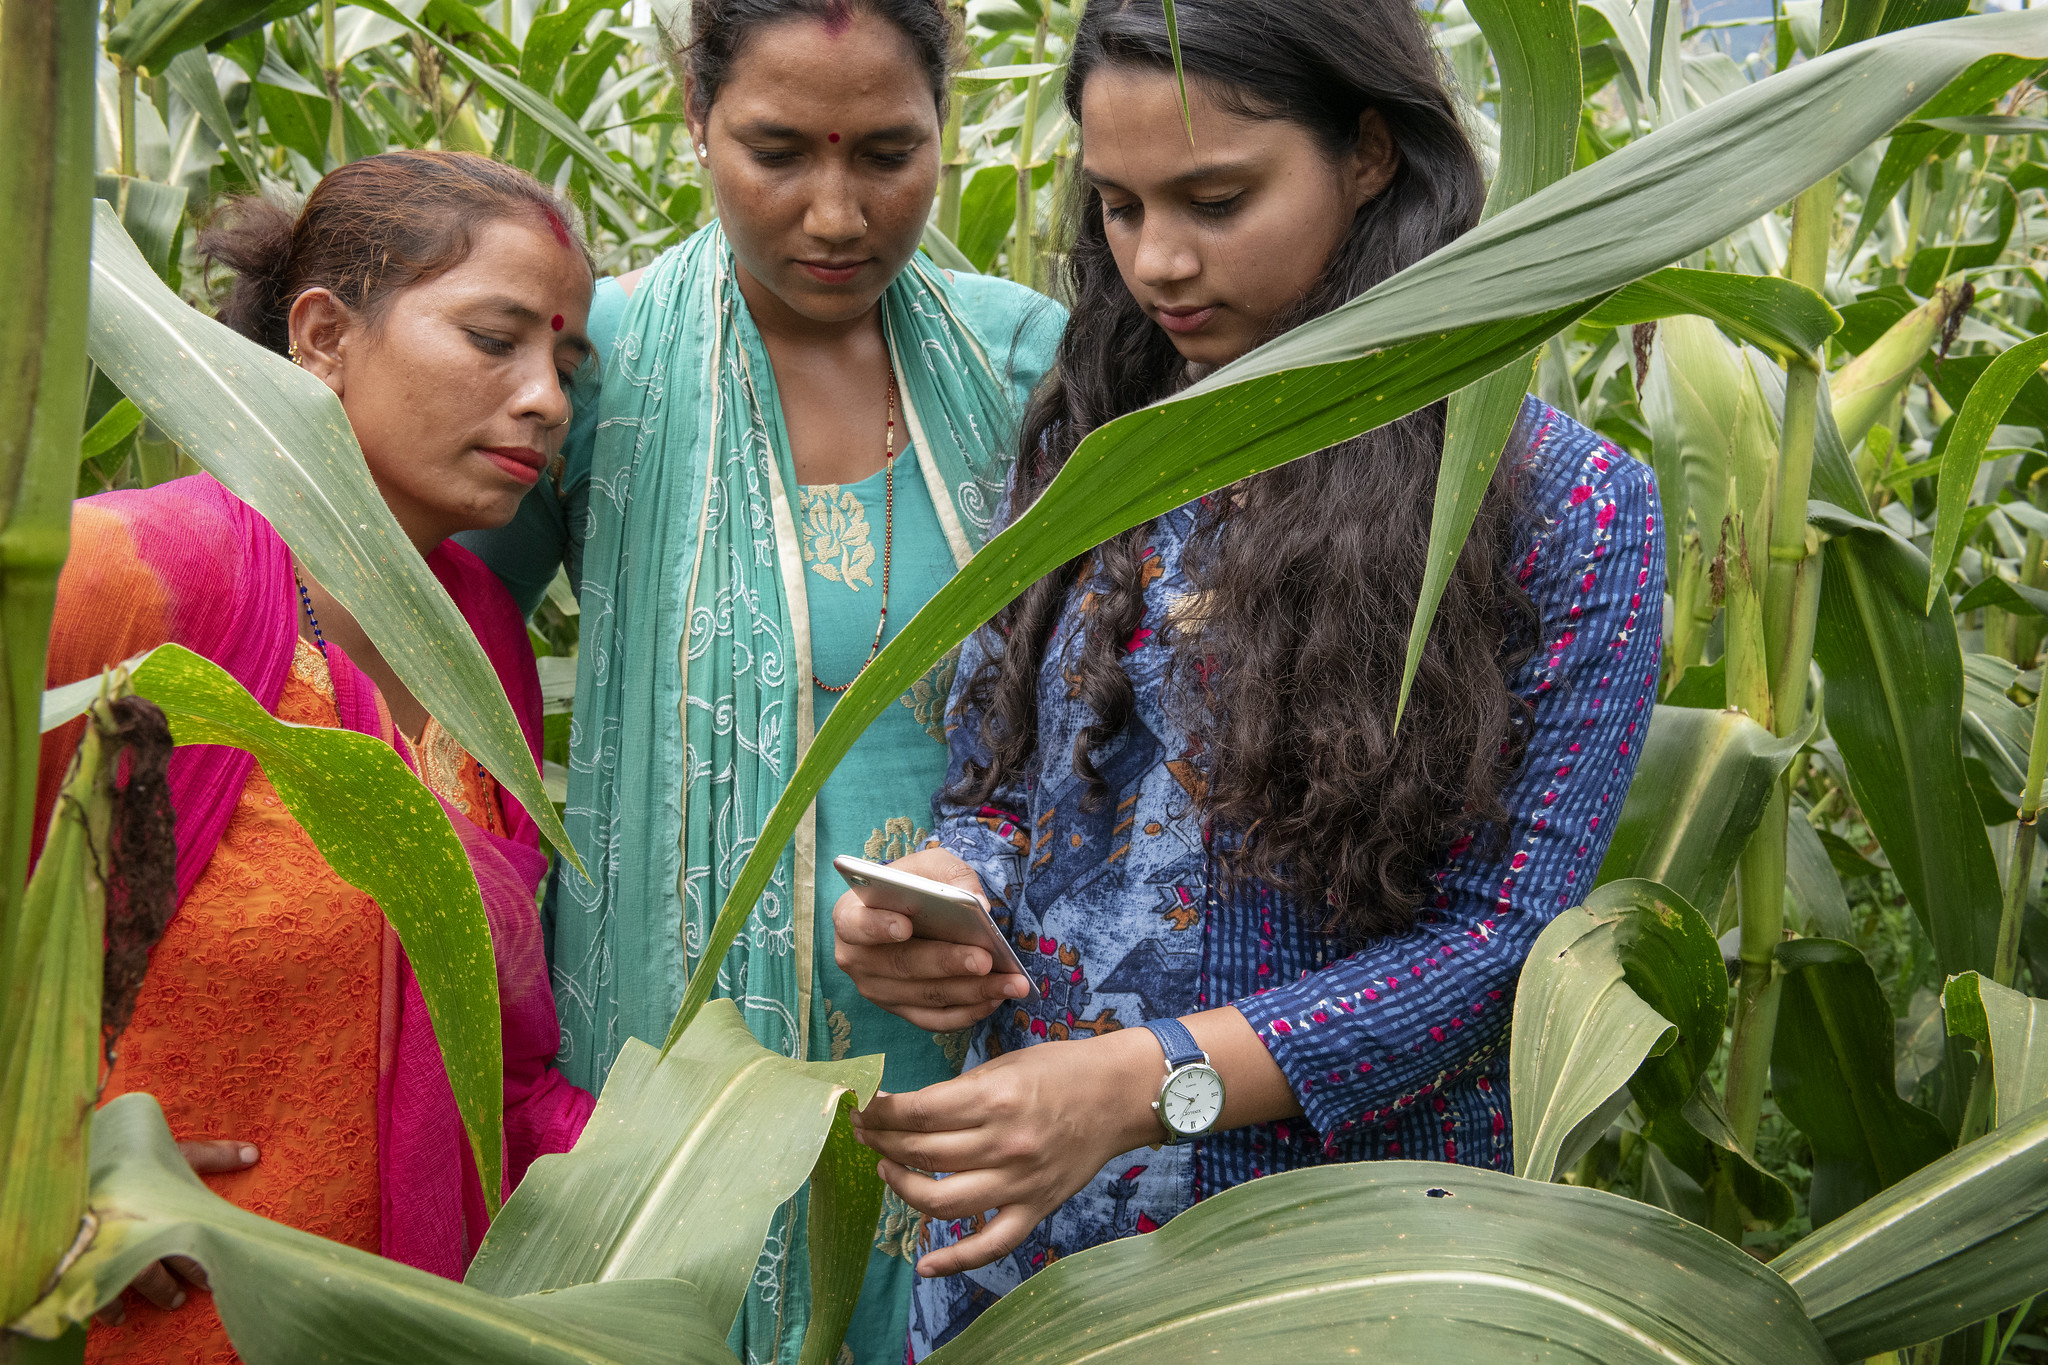 A researcher from the International Maize and Wheat Improvement Center (CIMMYT) demonstrates the use of a farming app in the field. (Photo: C. De Bode/CGIAR)